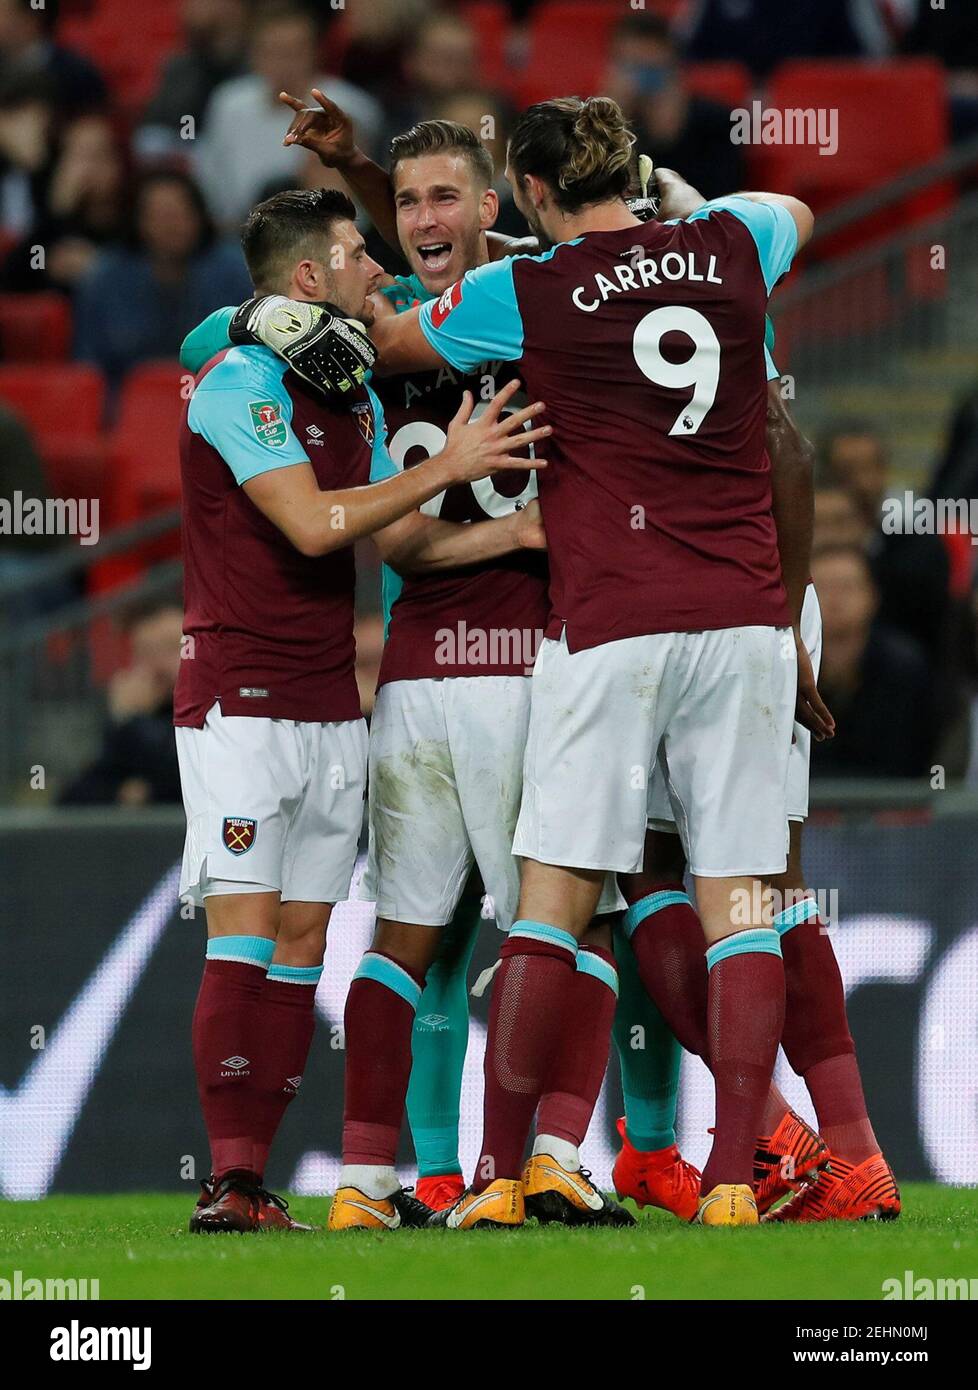 Soccer Football - Carabao Cup Fourth Round - Tottenham Hotspur vs West Ham United - Wembley Stadium, London, Britain - October 25, 2017   West Ham United's Angelo Ogbonna celebrates scoring their third goal with team mates                          REUTERS/Eddie Keogh    EDITORIAL USE ONLY. No use with unauthorized audio, video, data, fixture lists, club/league logos or 'live' services. Online in-match use limited to 75 images, no video emulation. No use in betting, games or single club/league/player publications. Please contact your account representative for further details. Stock Photo